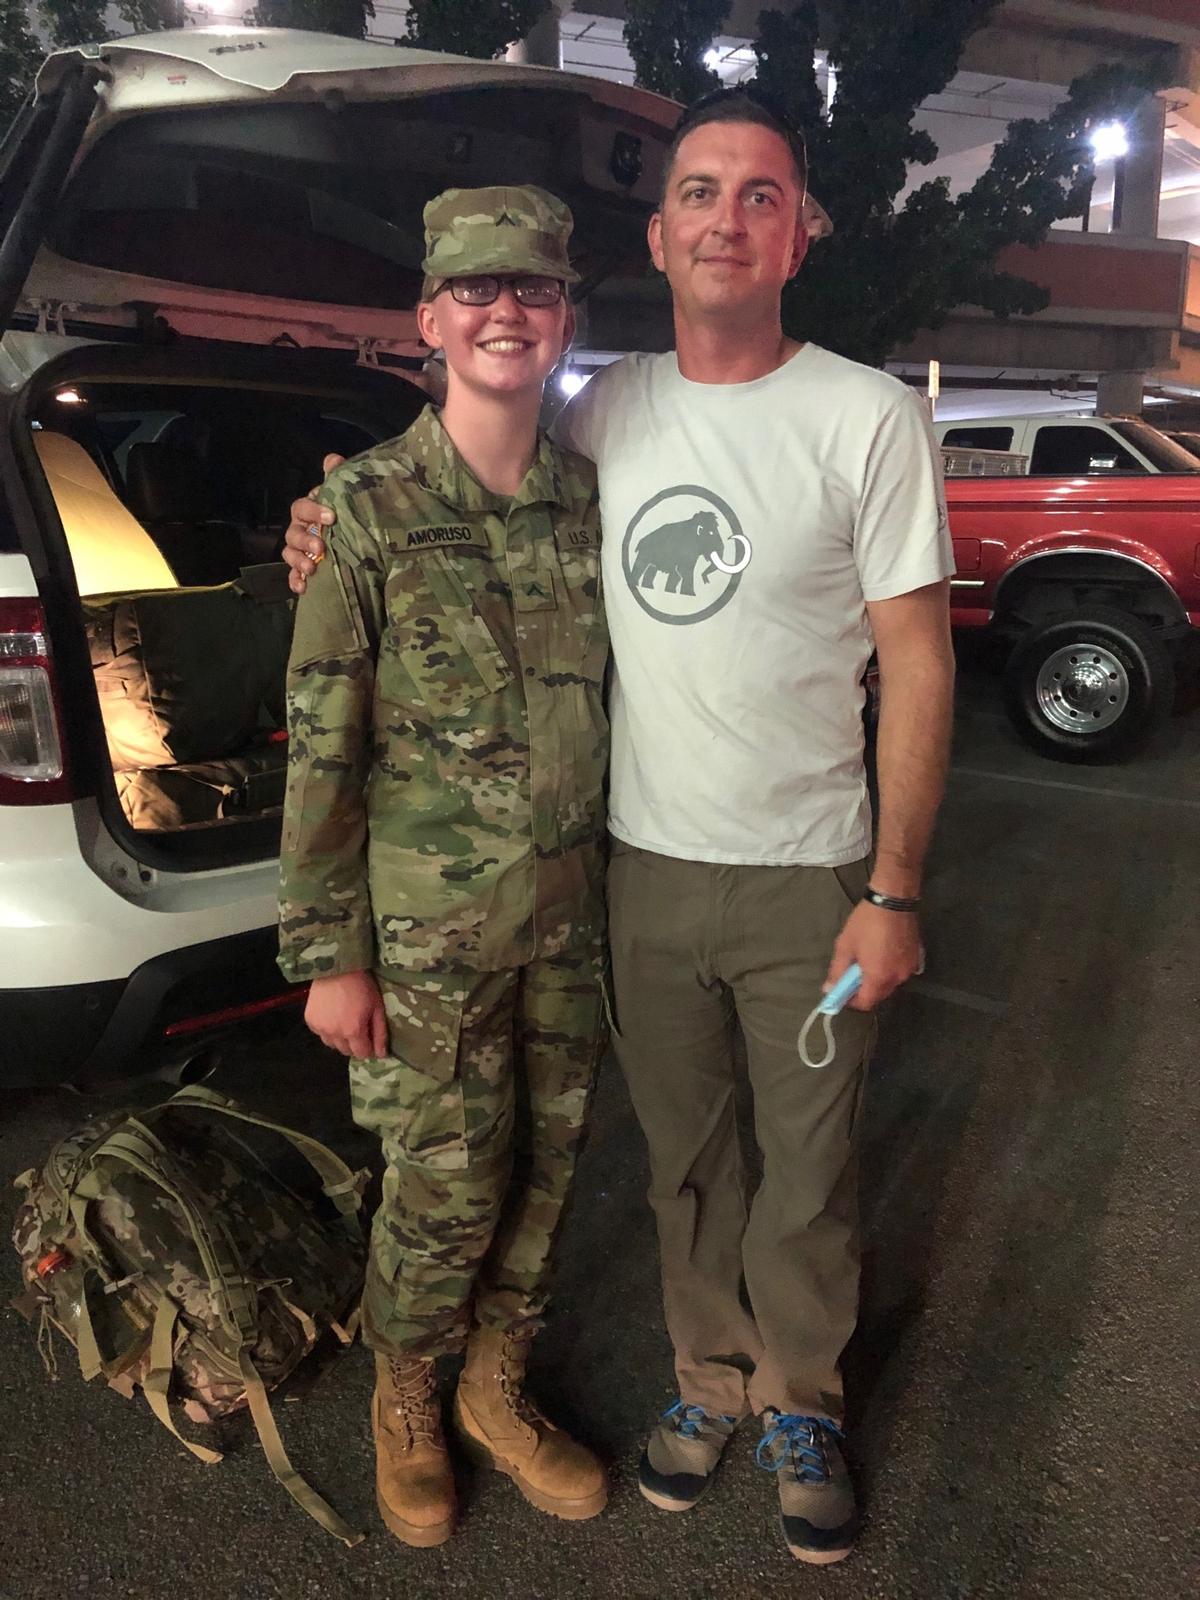 Idaho Army National Guard Pvt. Ashlynn Amoruso poses with her father, 1st Sgt. Dan Amoruso, at the Boise Airport upon returning from Basic Combat Training on Aug. 20, 2020 (<a href="https://www.dvidshub.net/image/6334606/impact-summer-high-school-student-spends-summer-basic-training-preparing-future">Idaho Army National Guard</a>/DVIDSHUB)